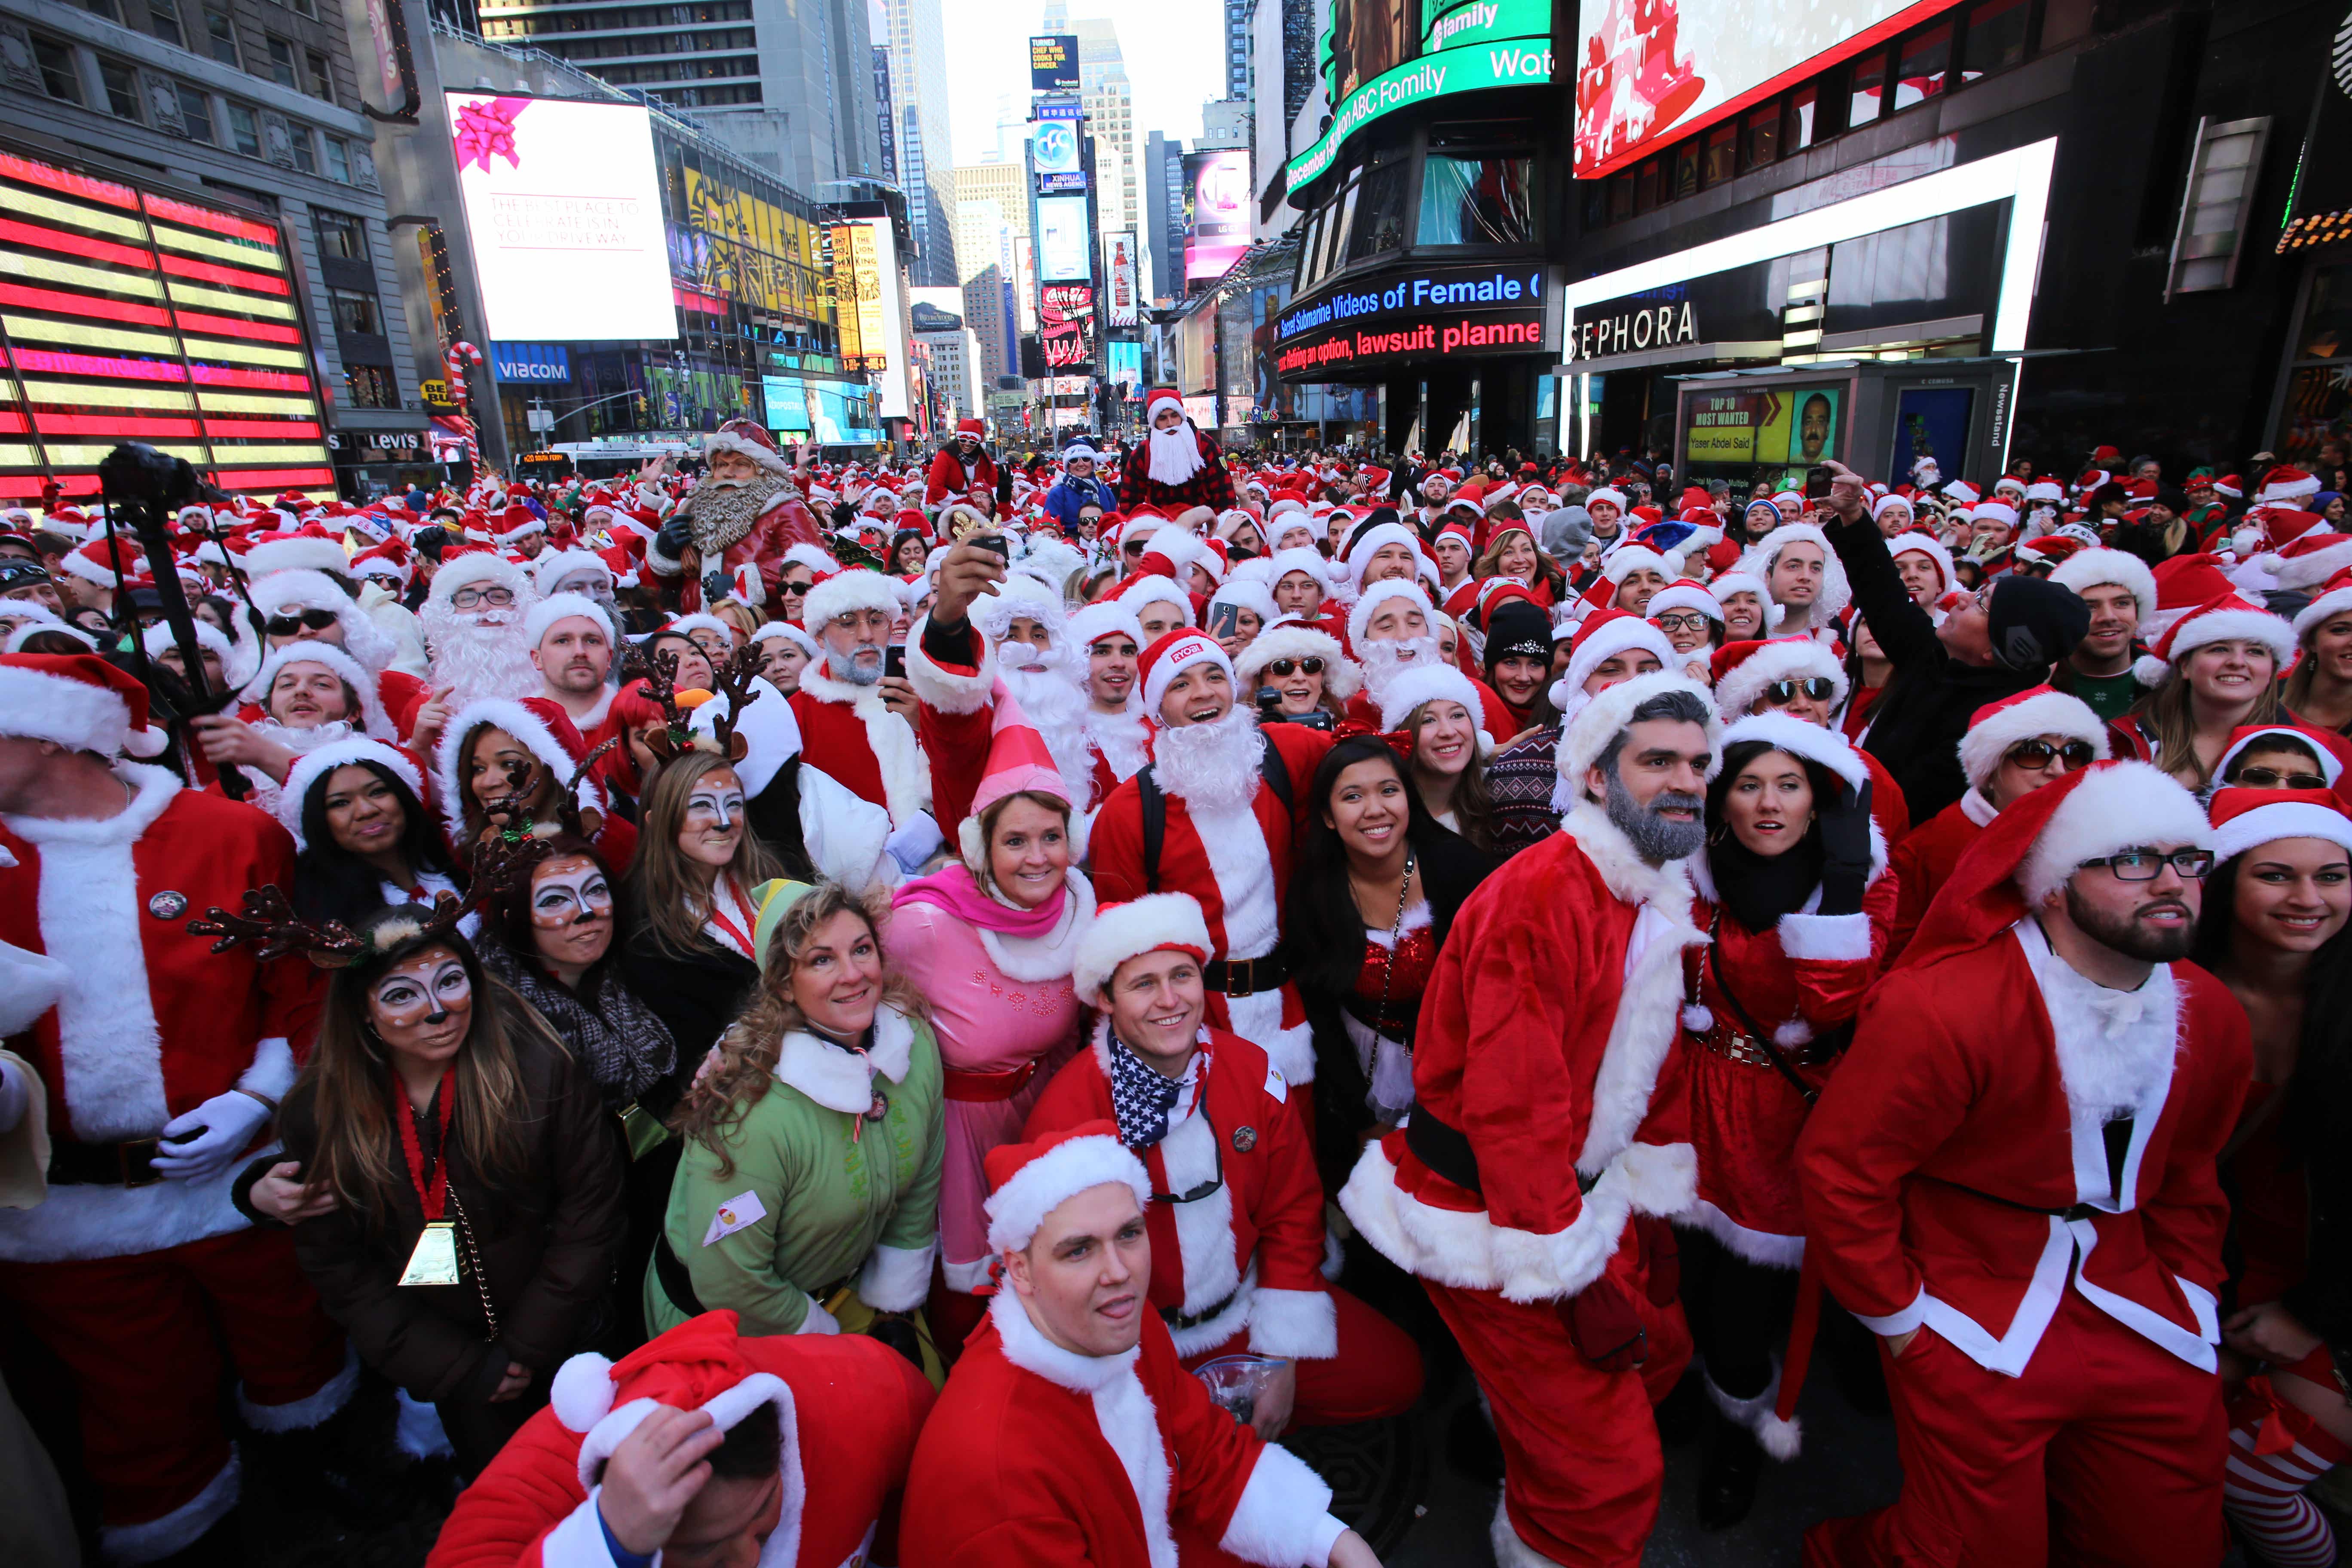 People all dressed up as Santa Claus in Time Square